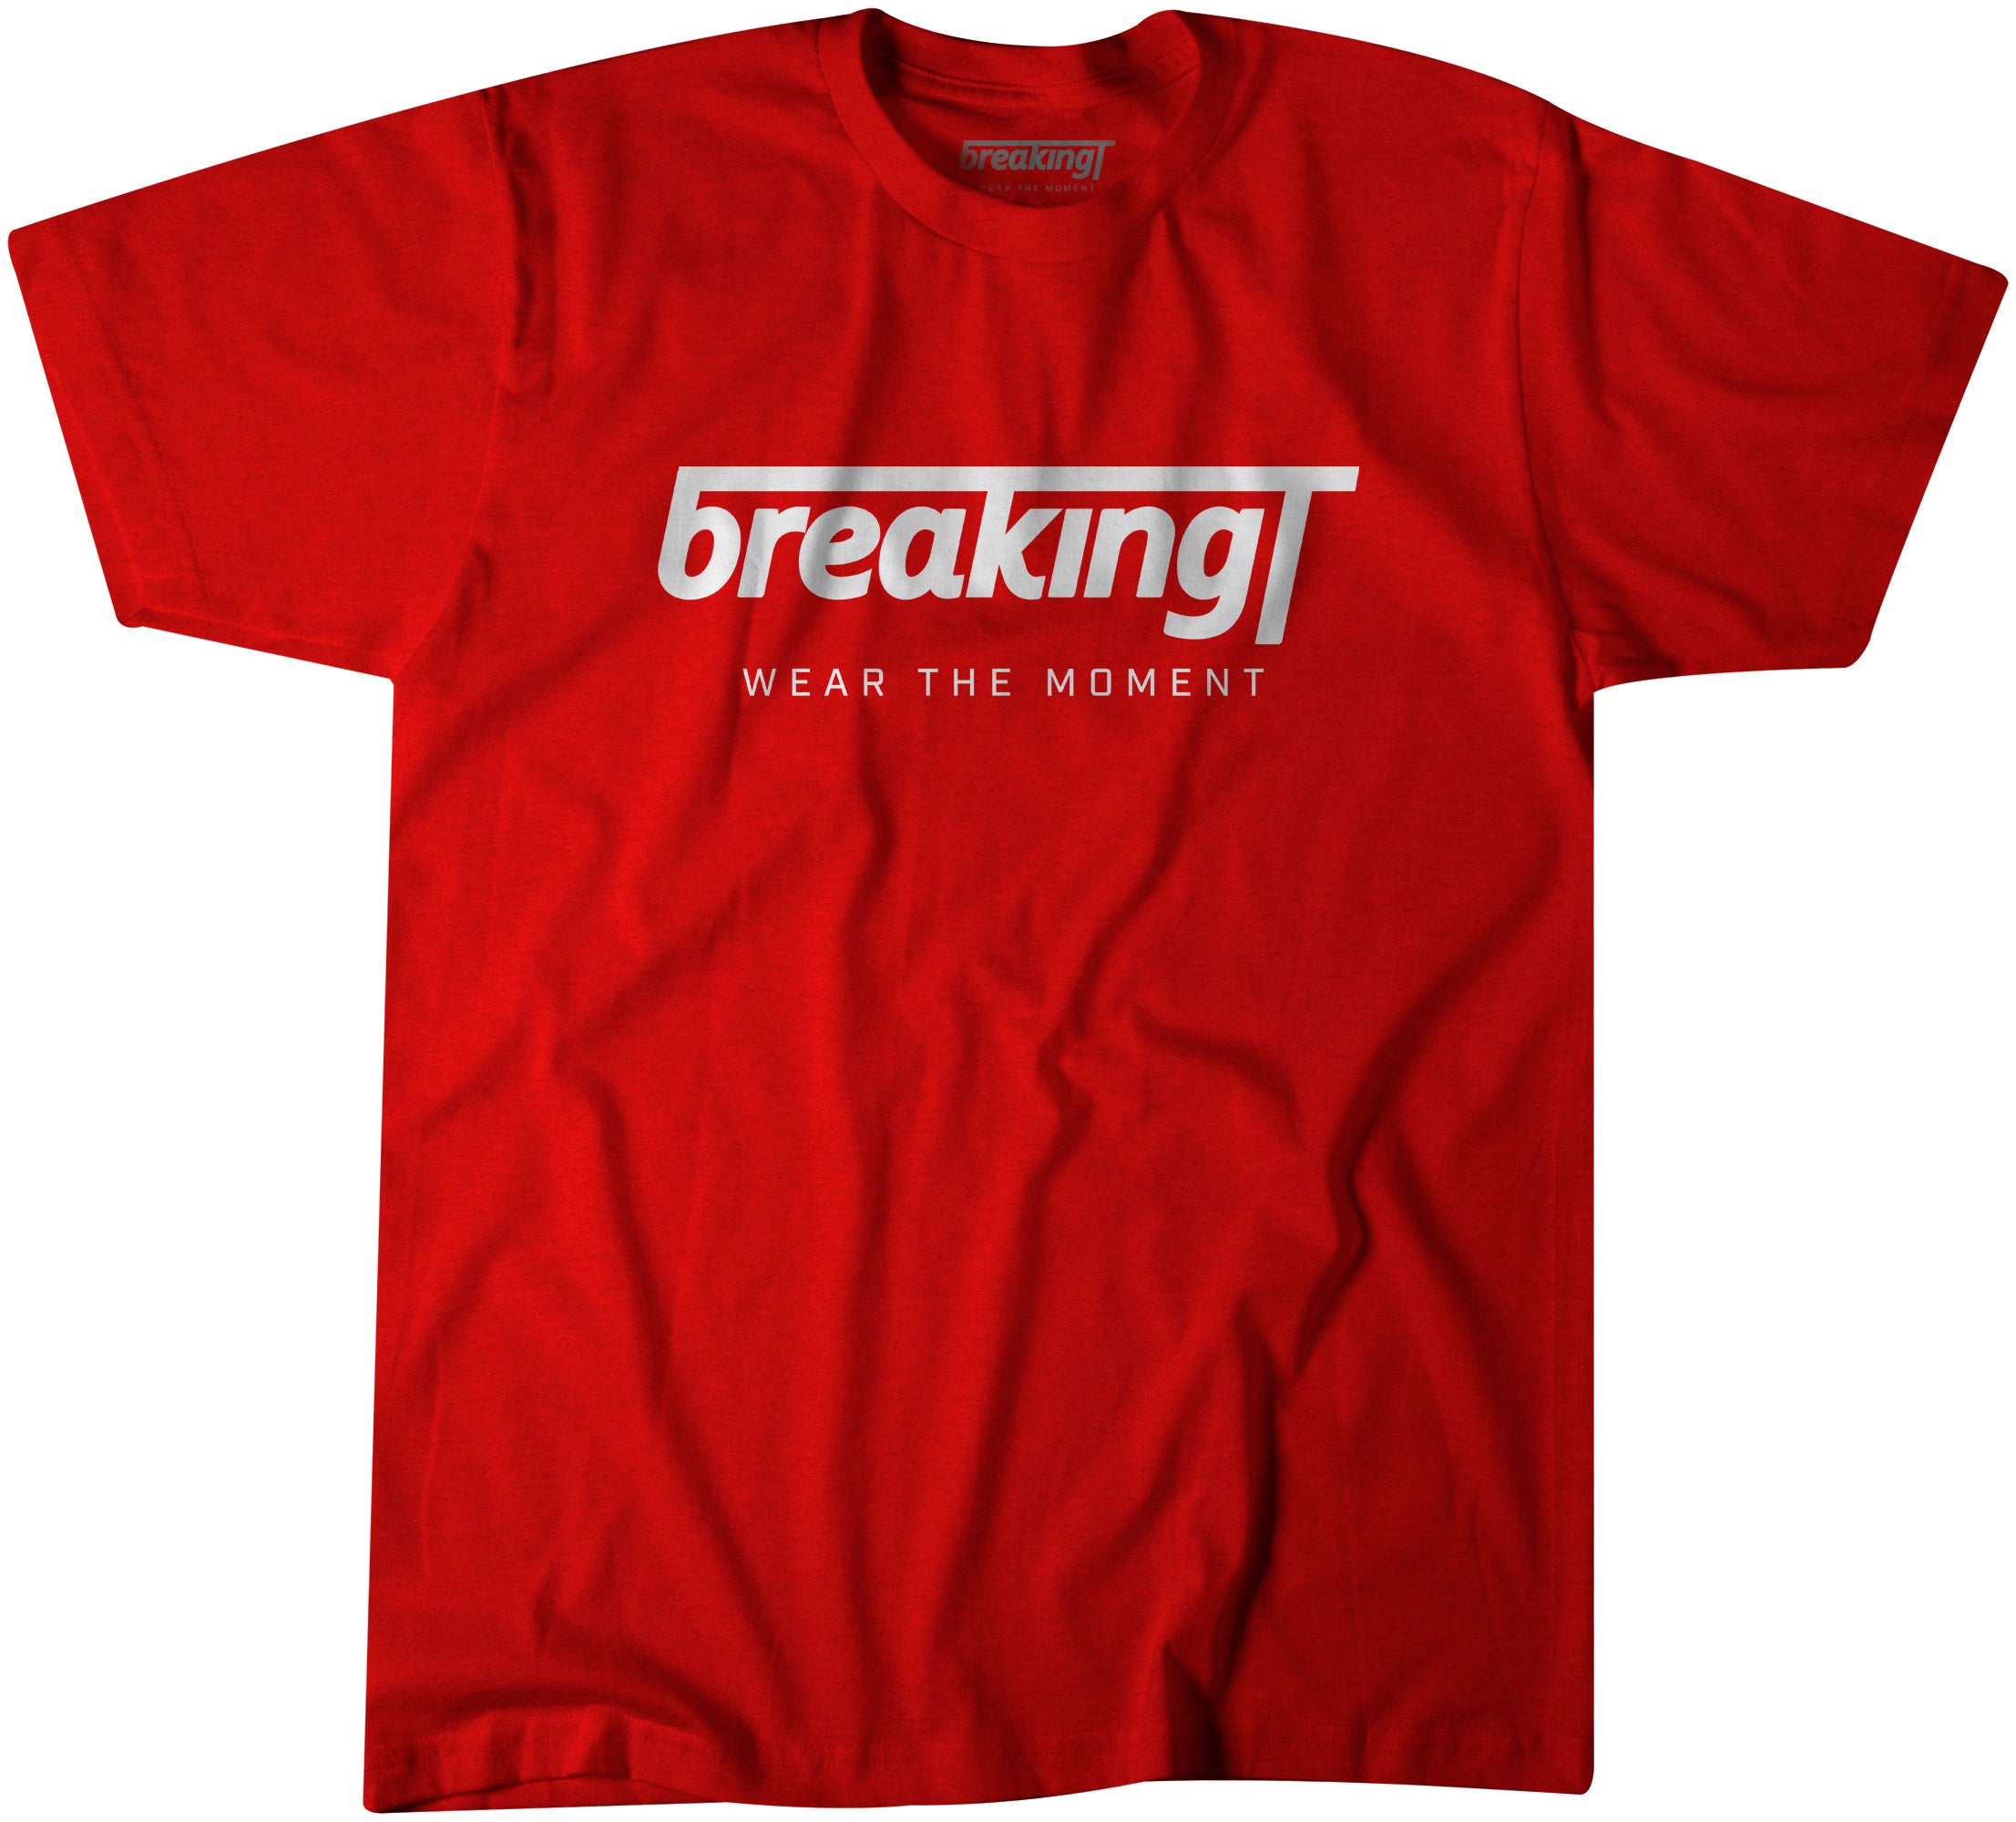 Get the new “JOCTOBER” shirt now from Breaking T! - Battery Power